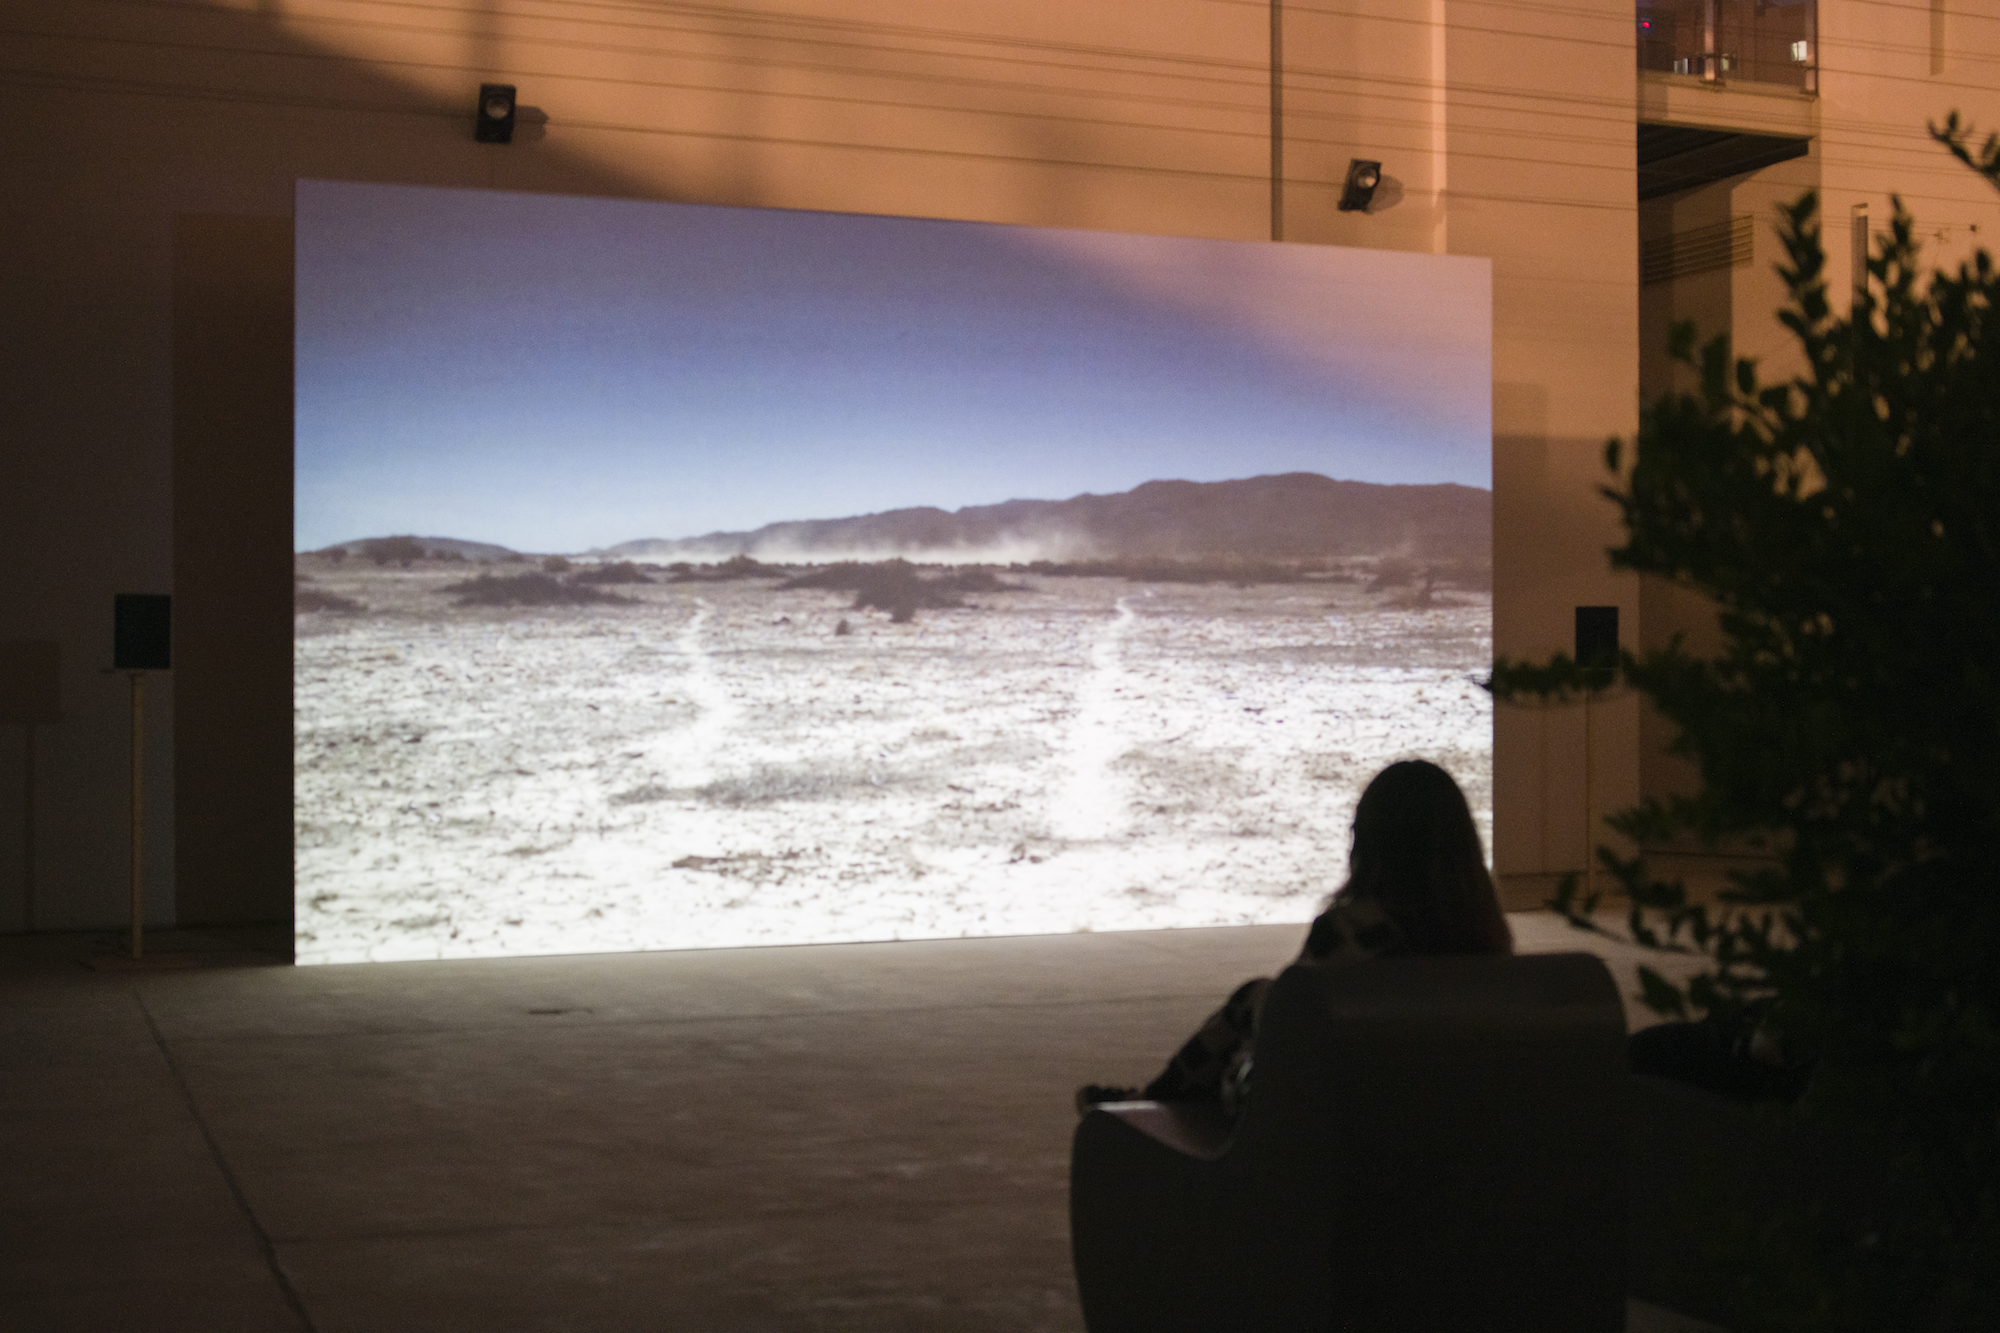 The silhouette of a figure sits in a chair in the foreground before a screen depicting a desert landscape sits in the background amongst an urban space.